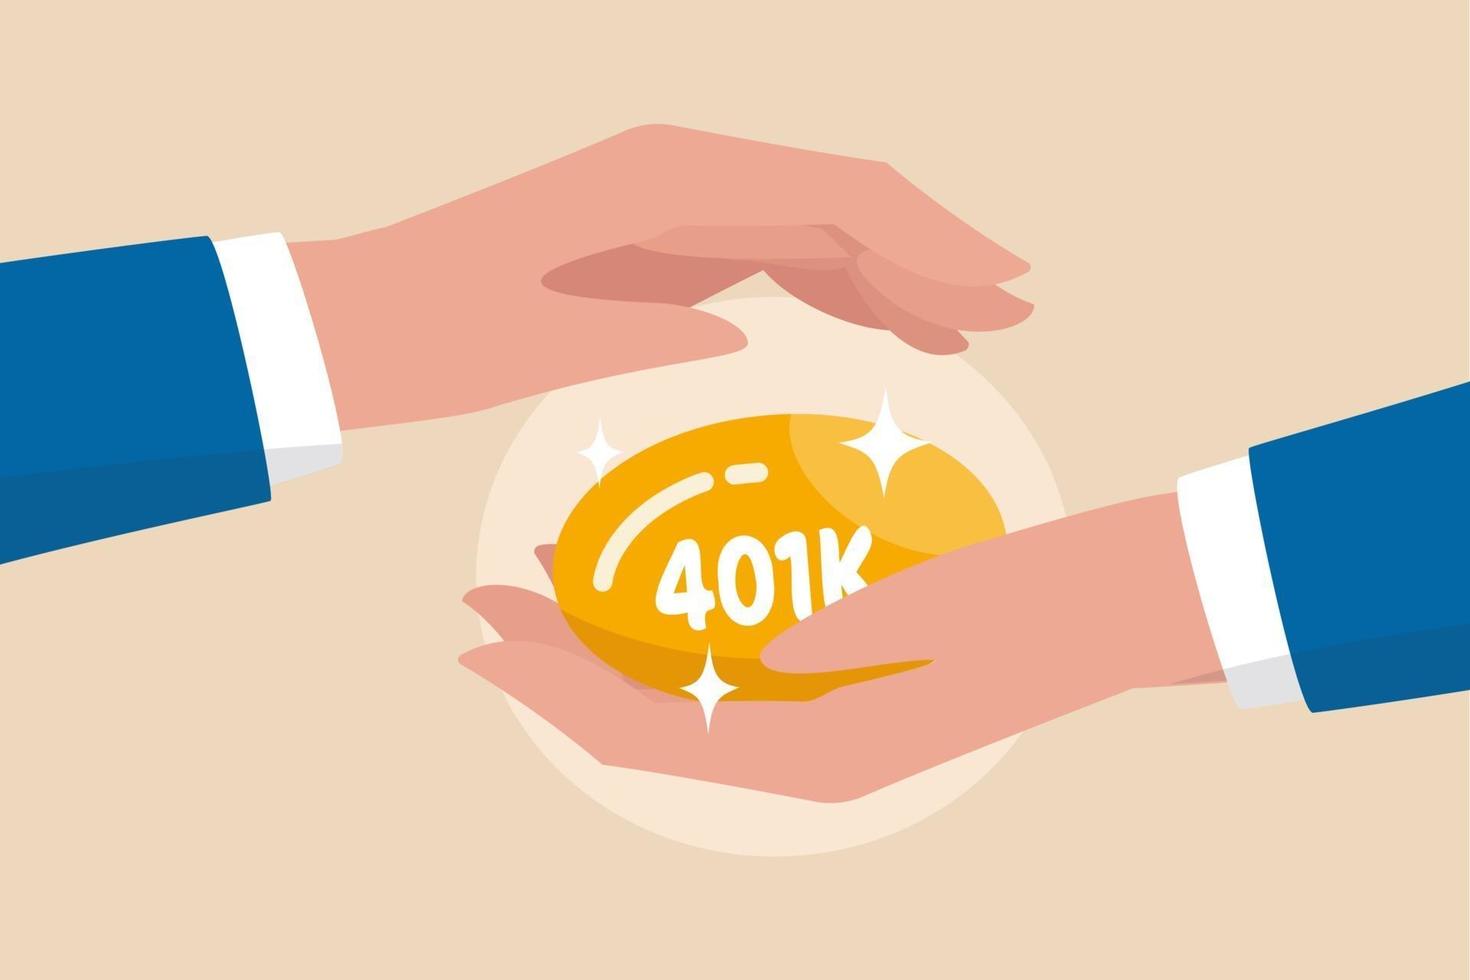 Protect your 401k in economic crisis, retirement planning and investment, benefit from pension fund concept, businessman hand tenderly holding and covering golden egg with label as 401K. vector